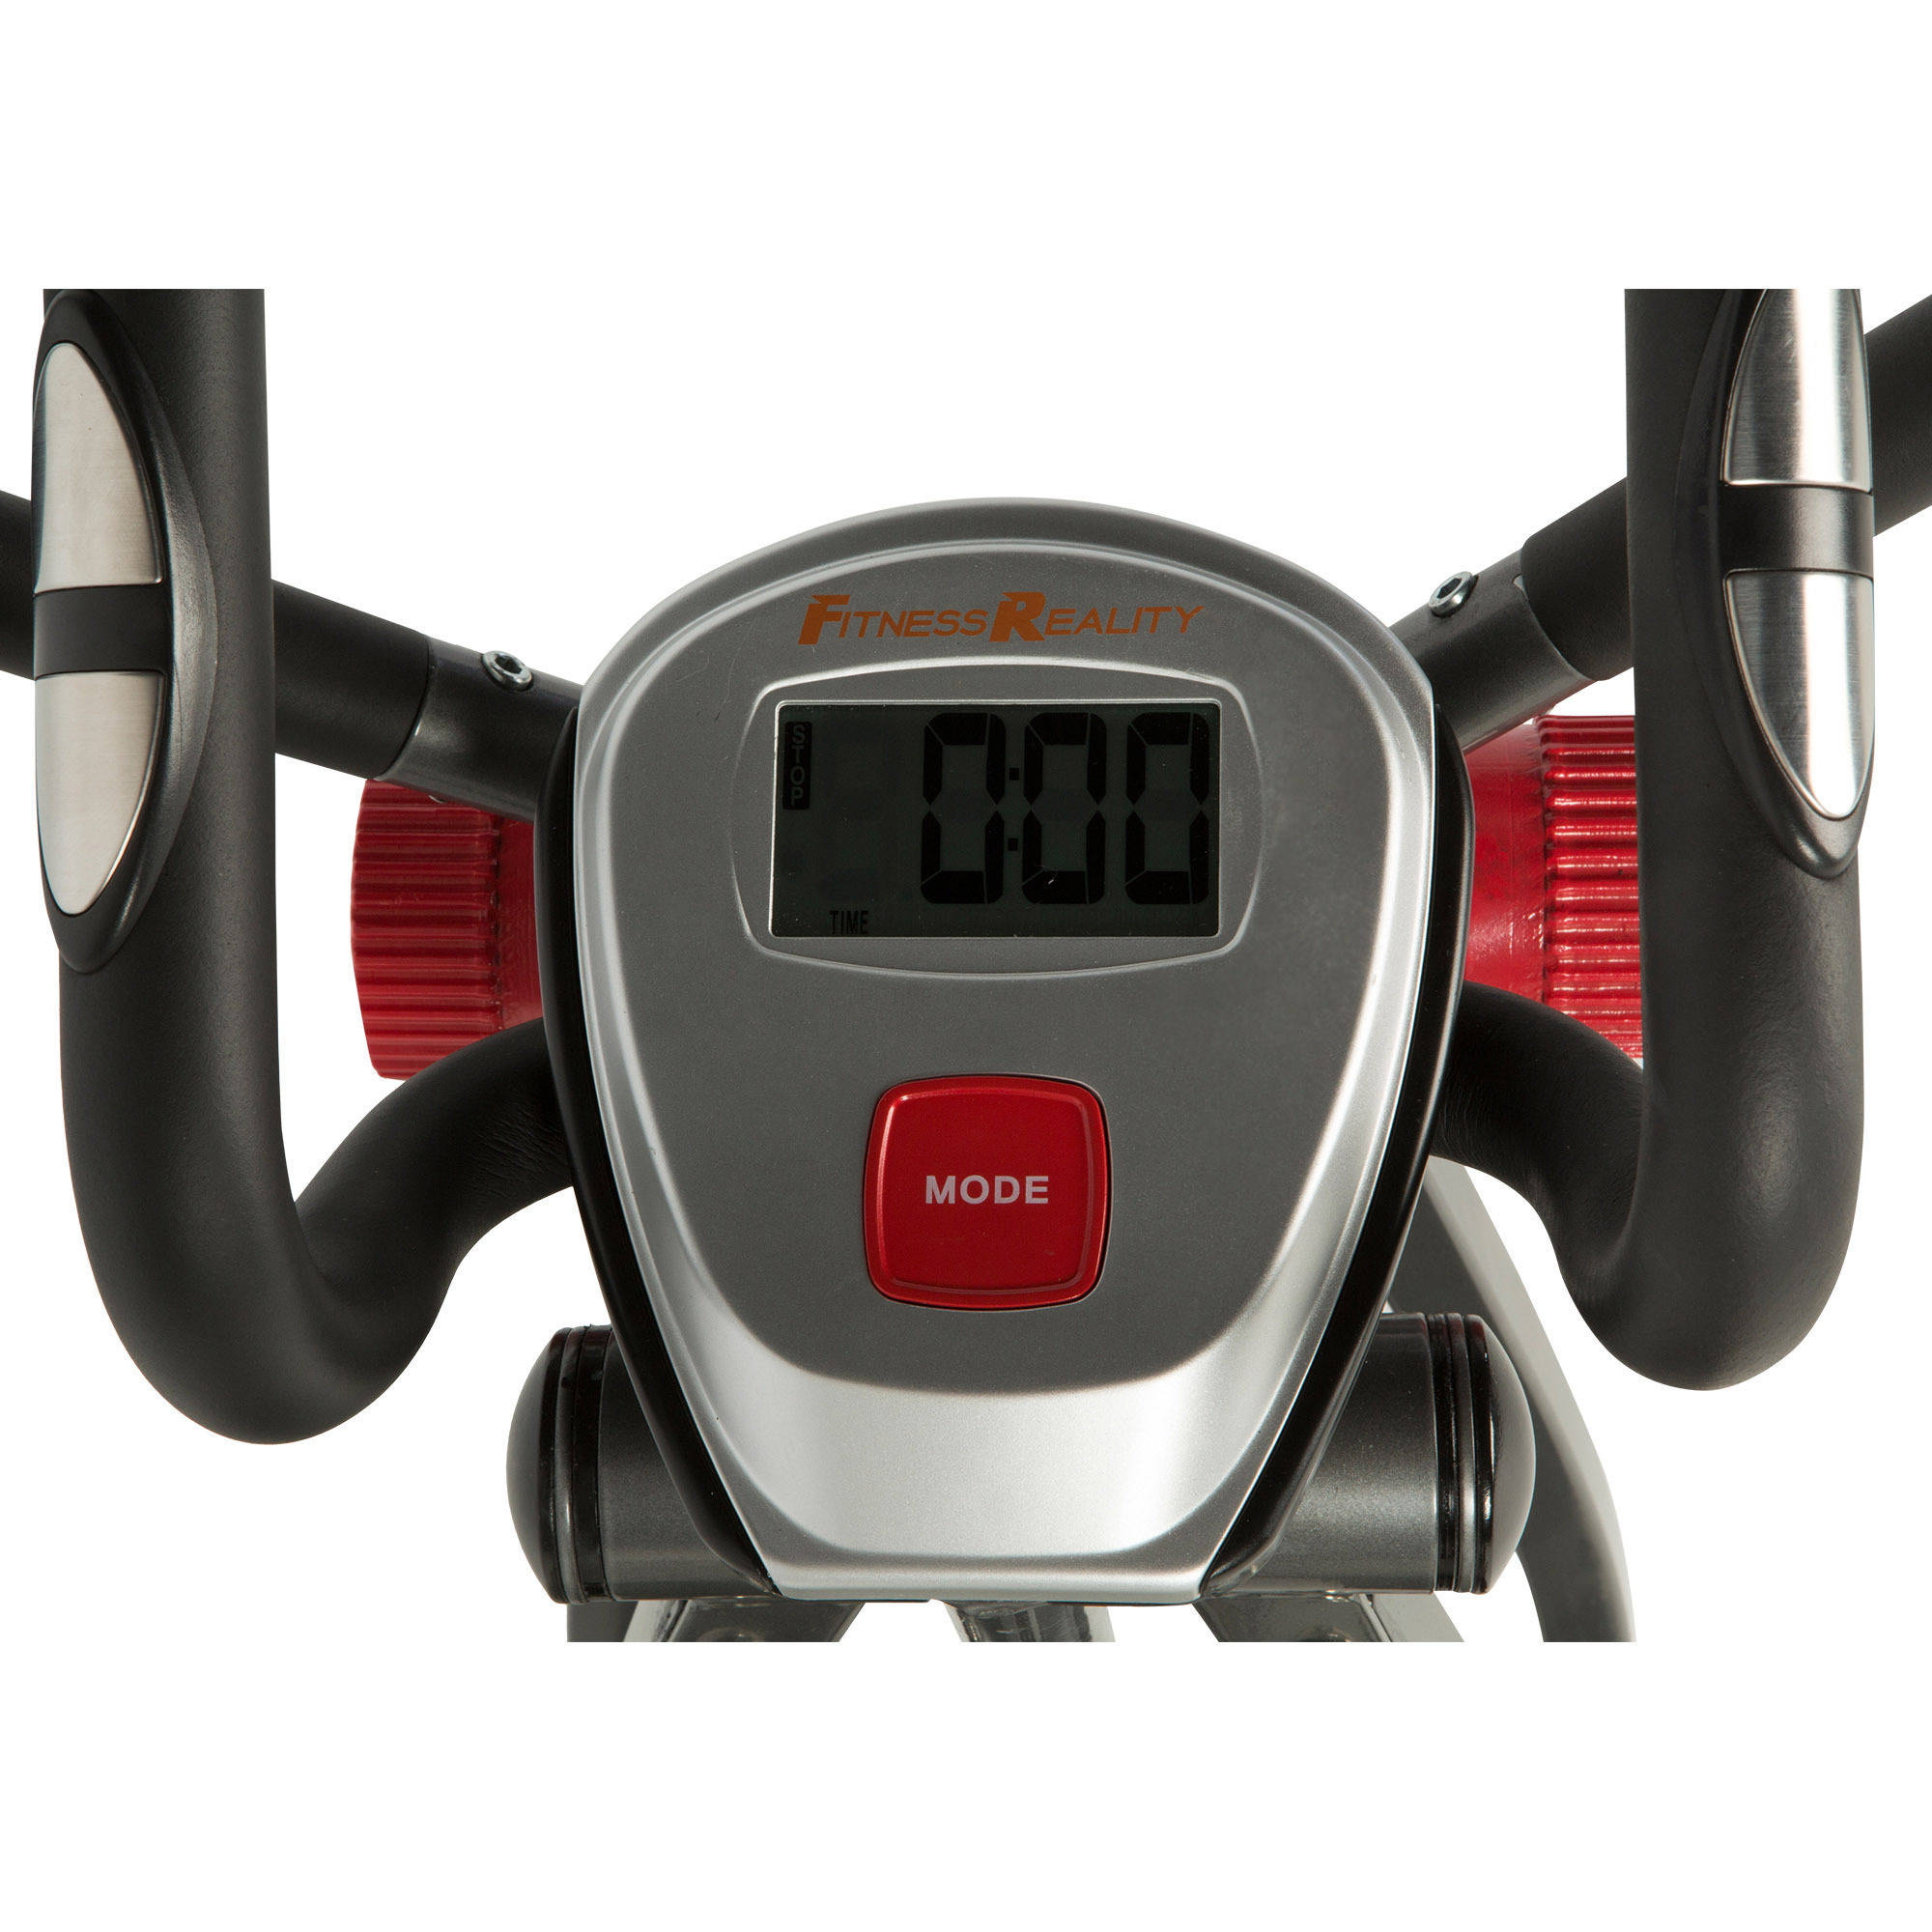 Fitness Reality Multi-Direction Elliptical Cloud Walker X1 with Pulse Sensors - image 6 of 31